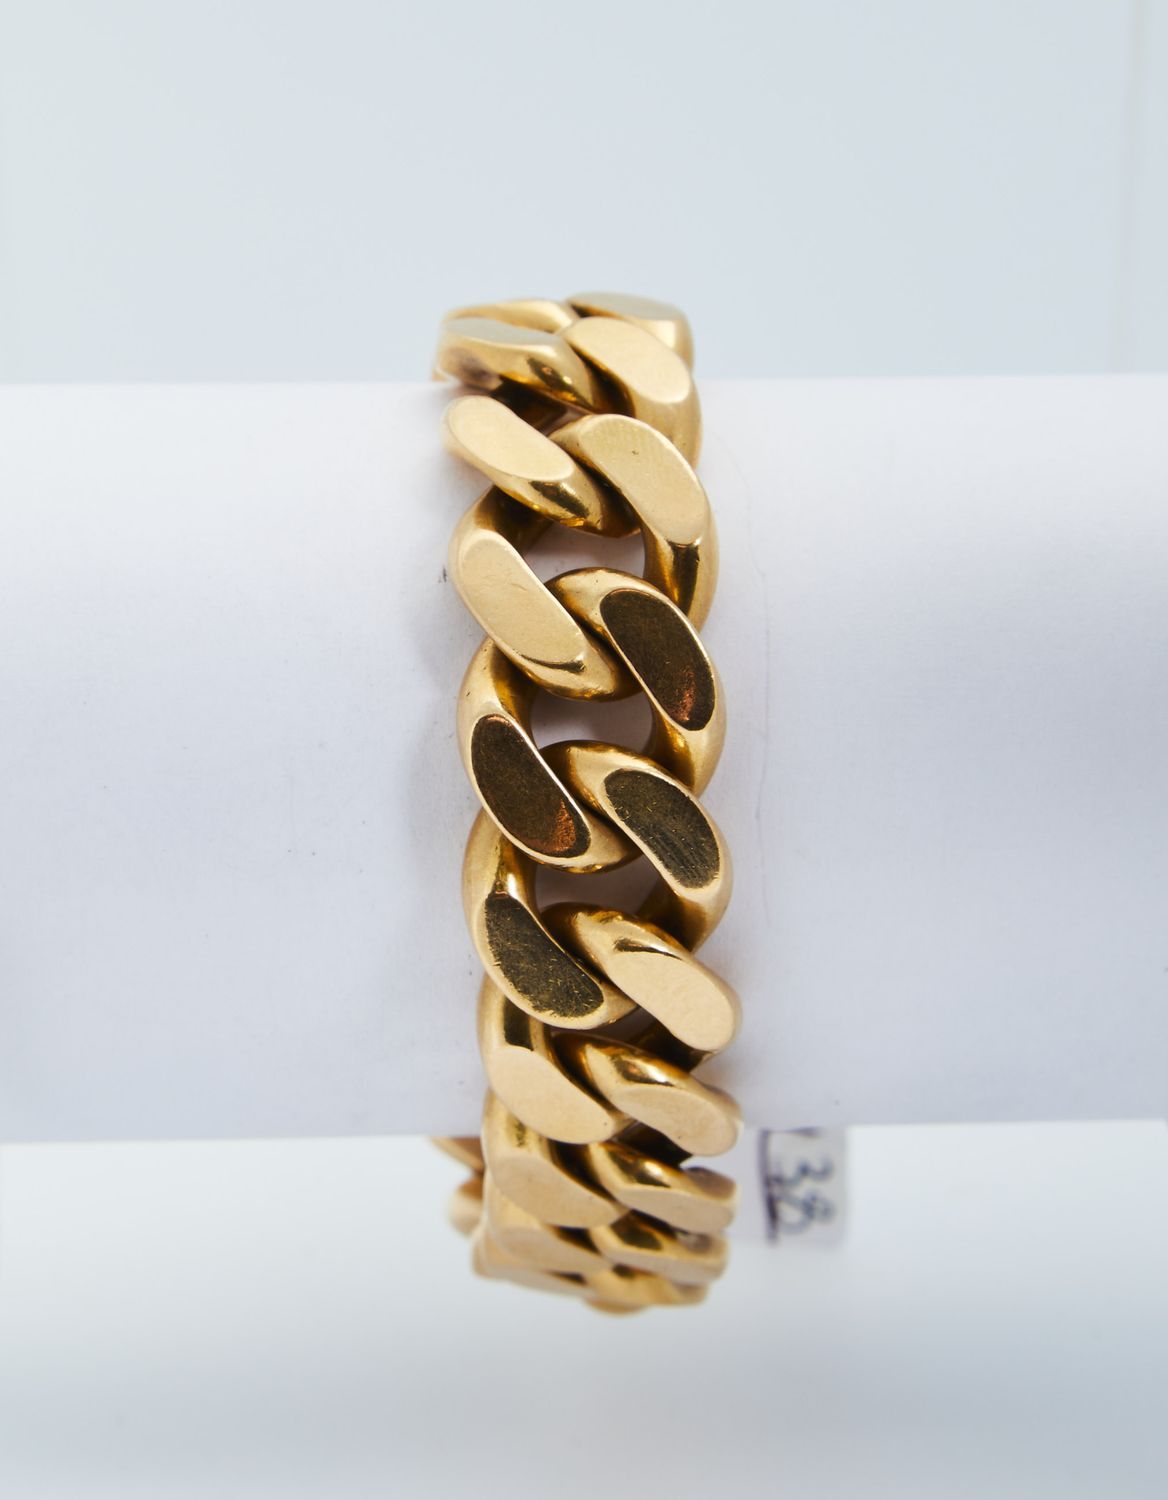 Null 217 Bracelet in yellow gold with curb chain, wrist 19 cm, weight 132.3 g